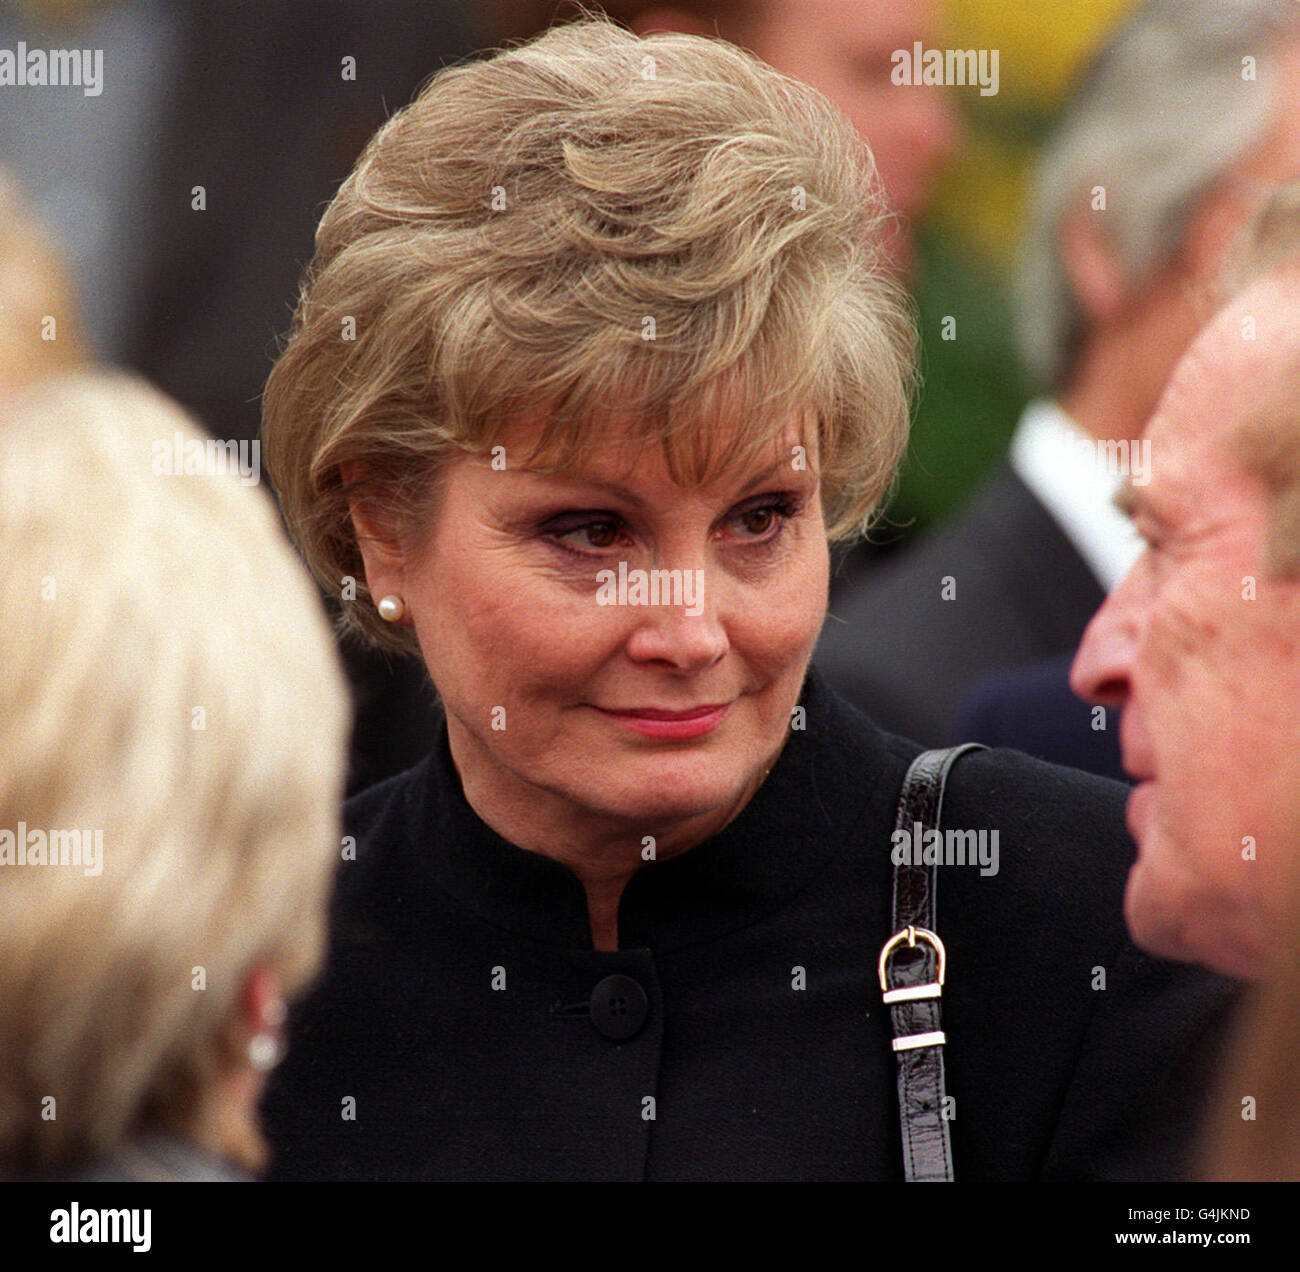 Wise Funeral/Angela Rippon Stock Photo